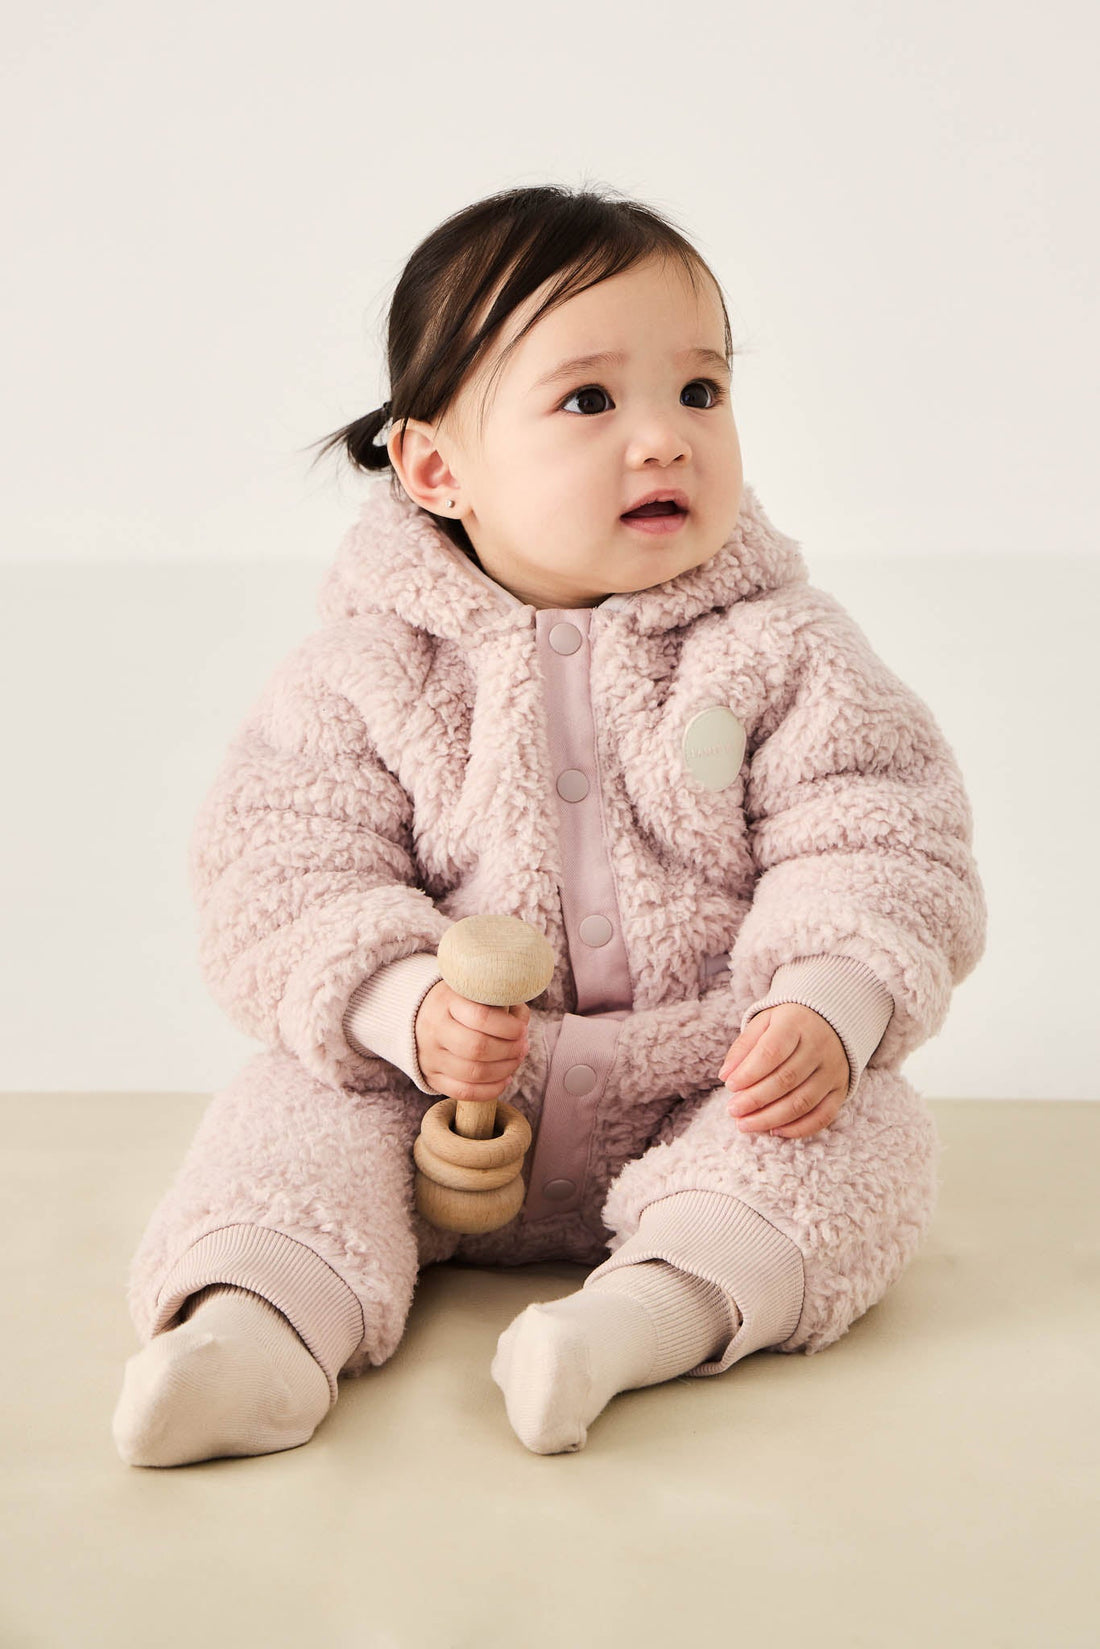 Sherpa Lenny Onepiece - Violet Tint Childrens Onepiece from Jamie Kay USA